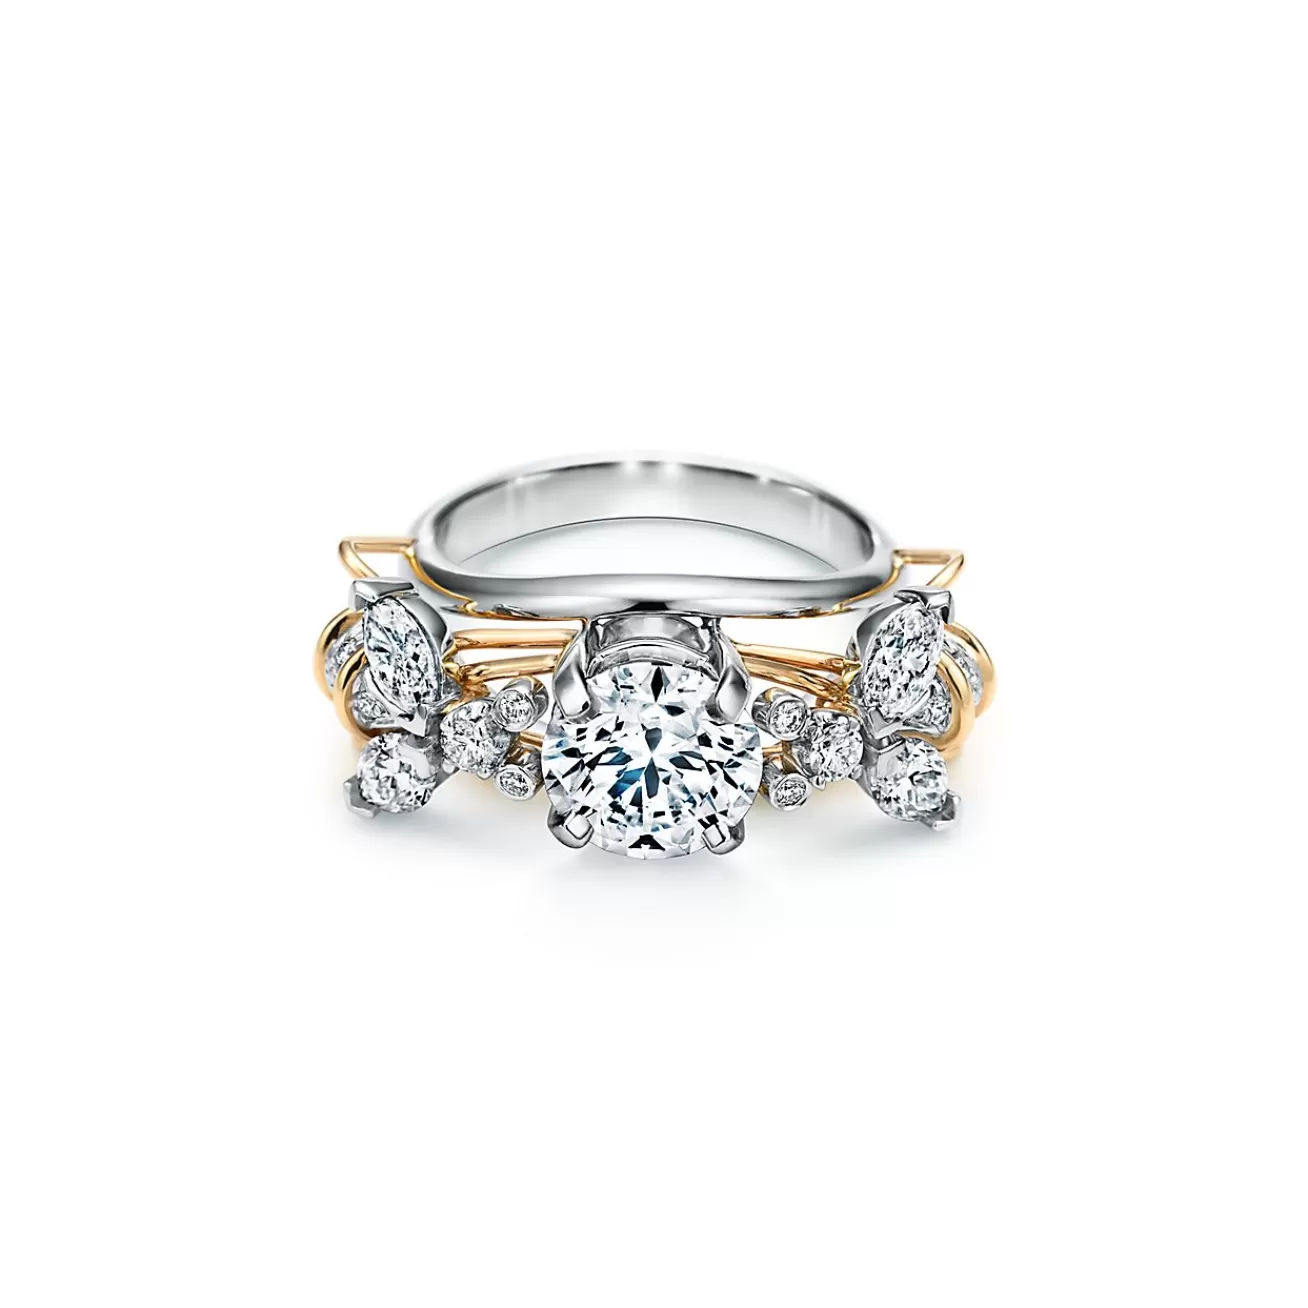 Tiffany & Co. Schlumberger by ™ Two Bees engagement ring in platinum and 18k gold | ^ Jean Schlumberger by Tiffany | Engagement Rings